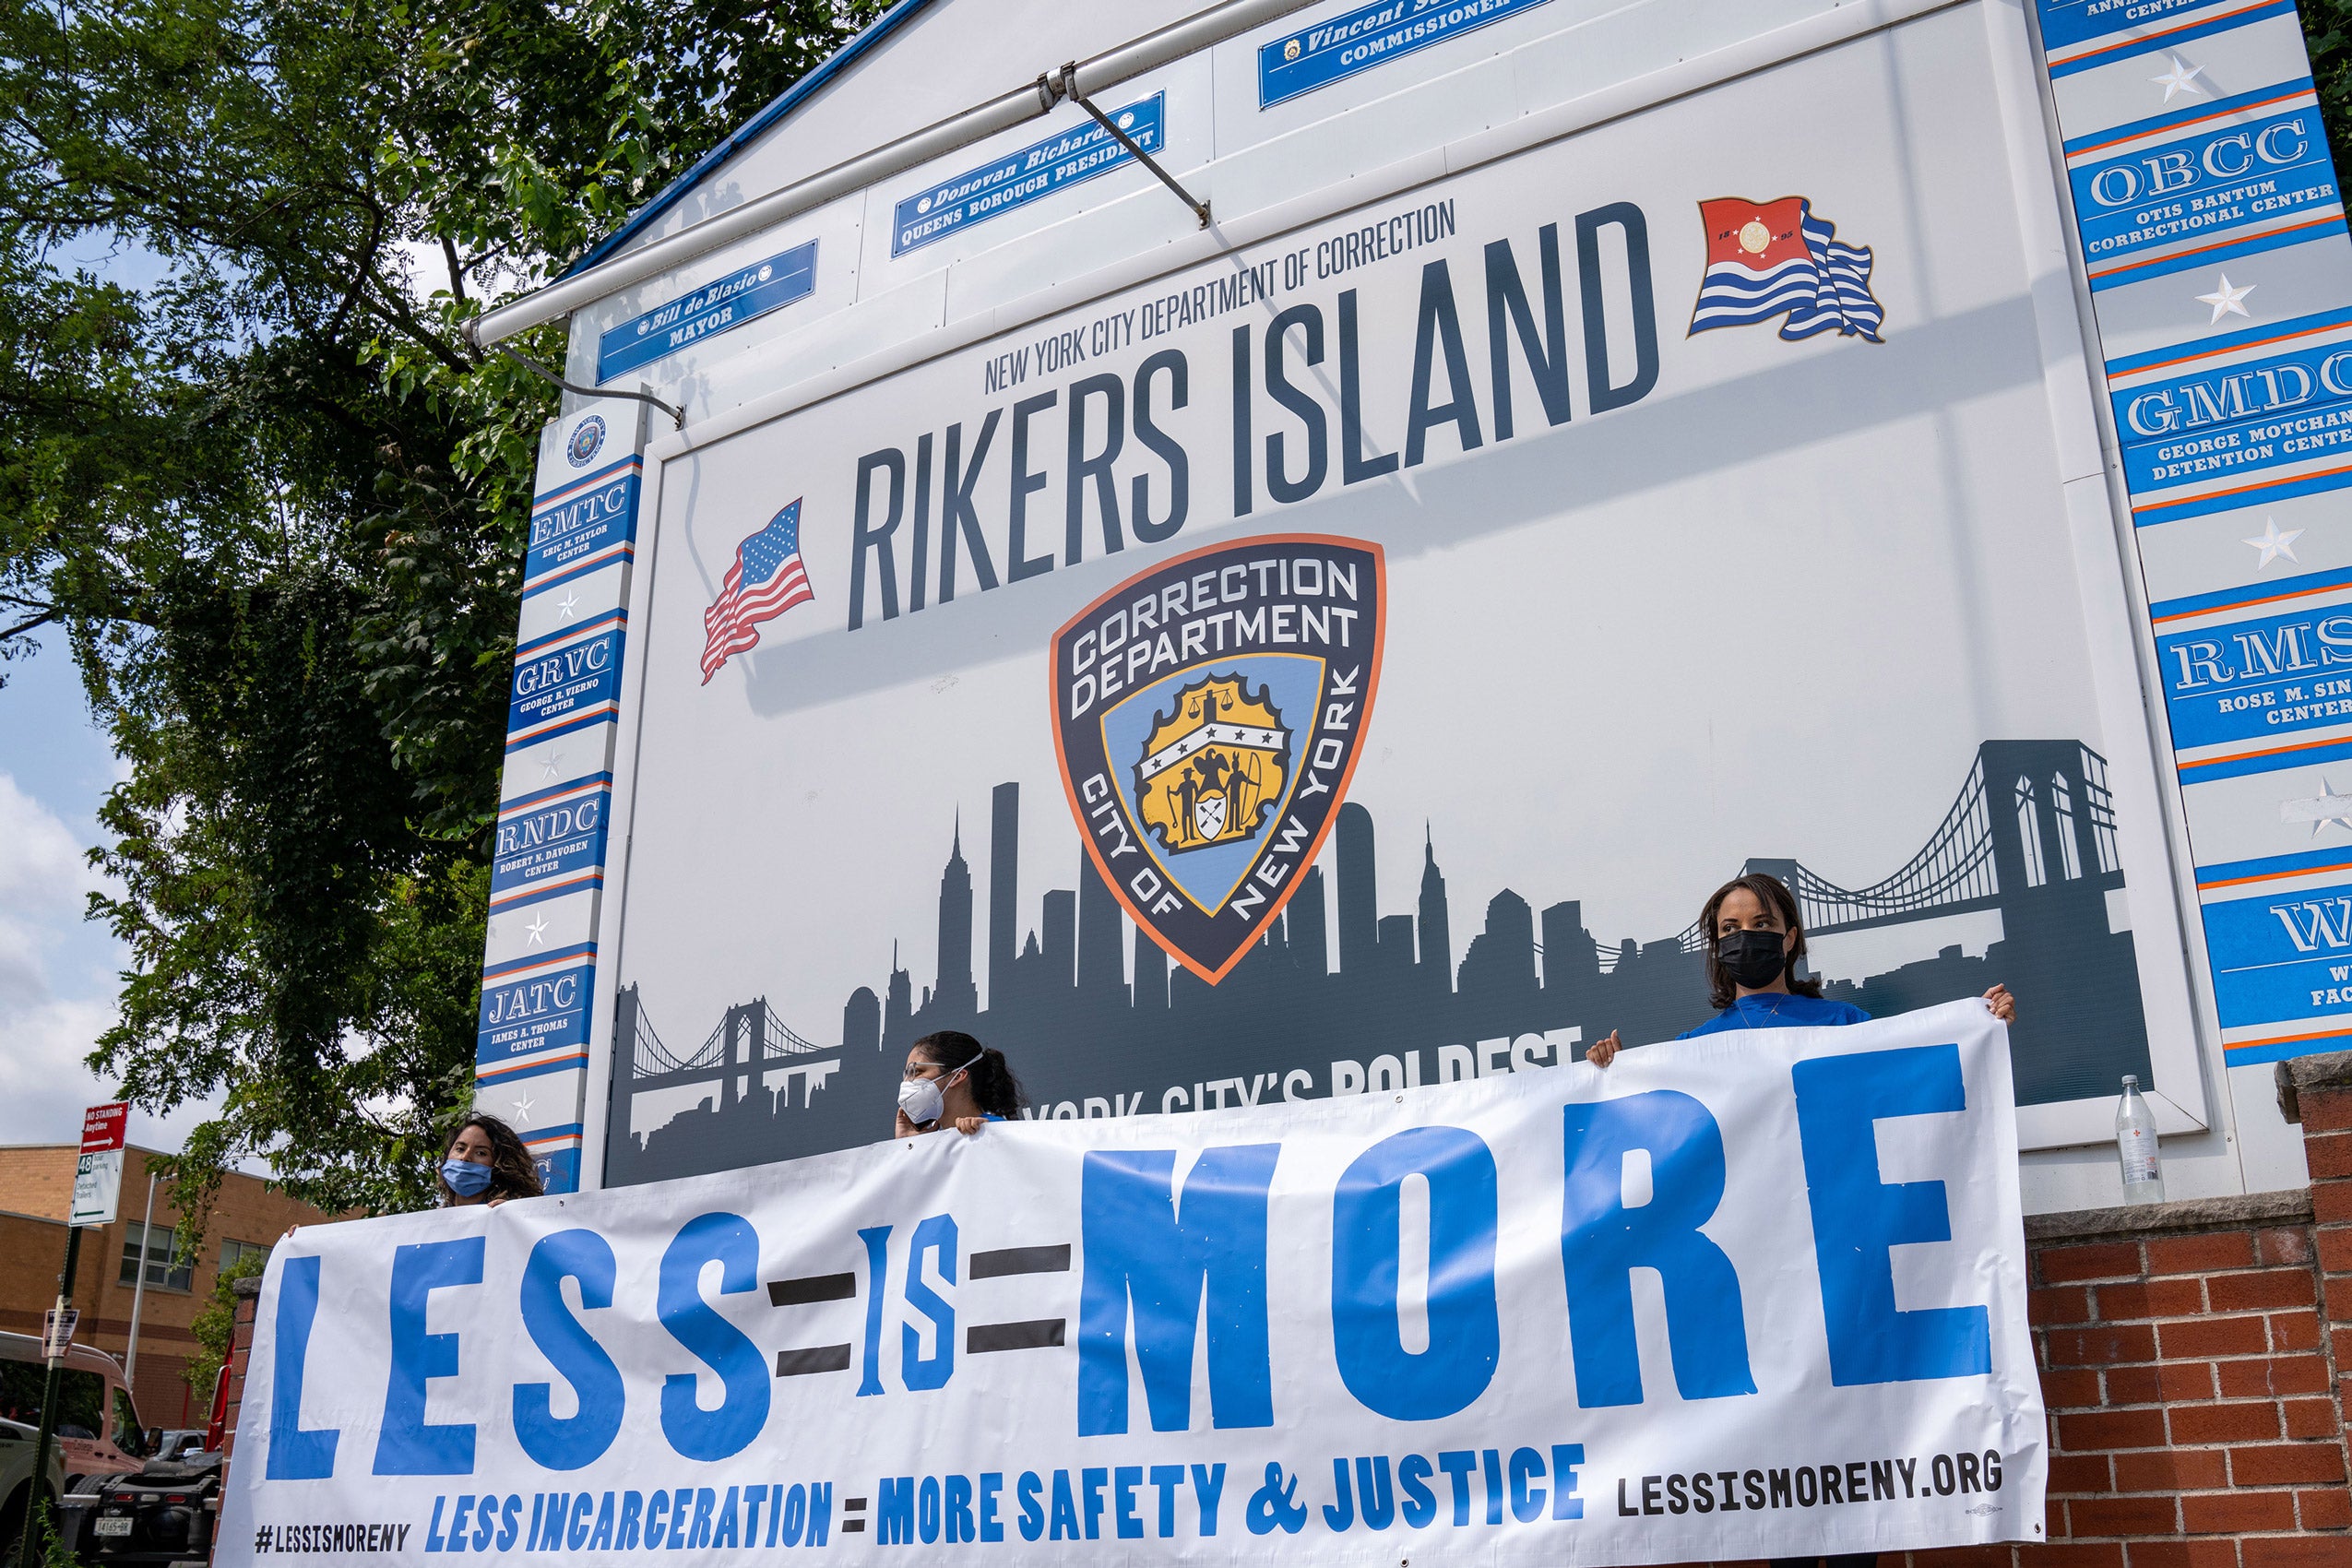 Large sign that says Rikers Island with a sign below it that says 